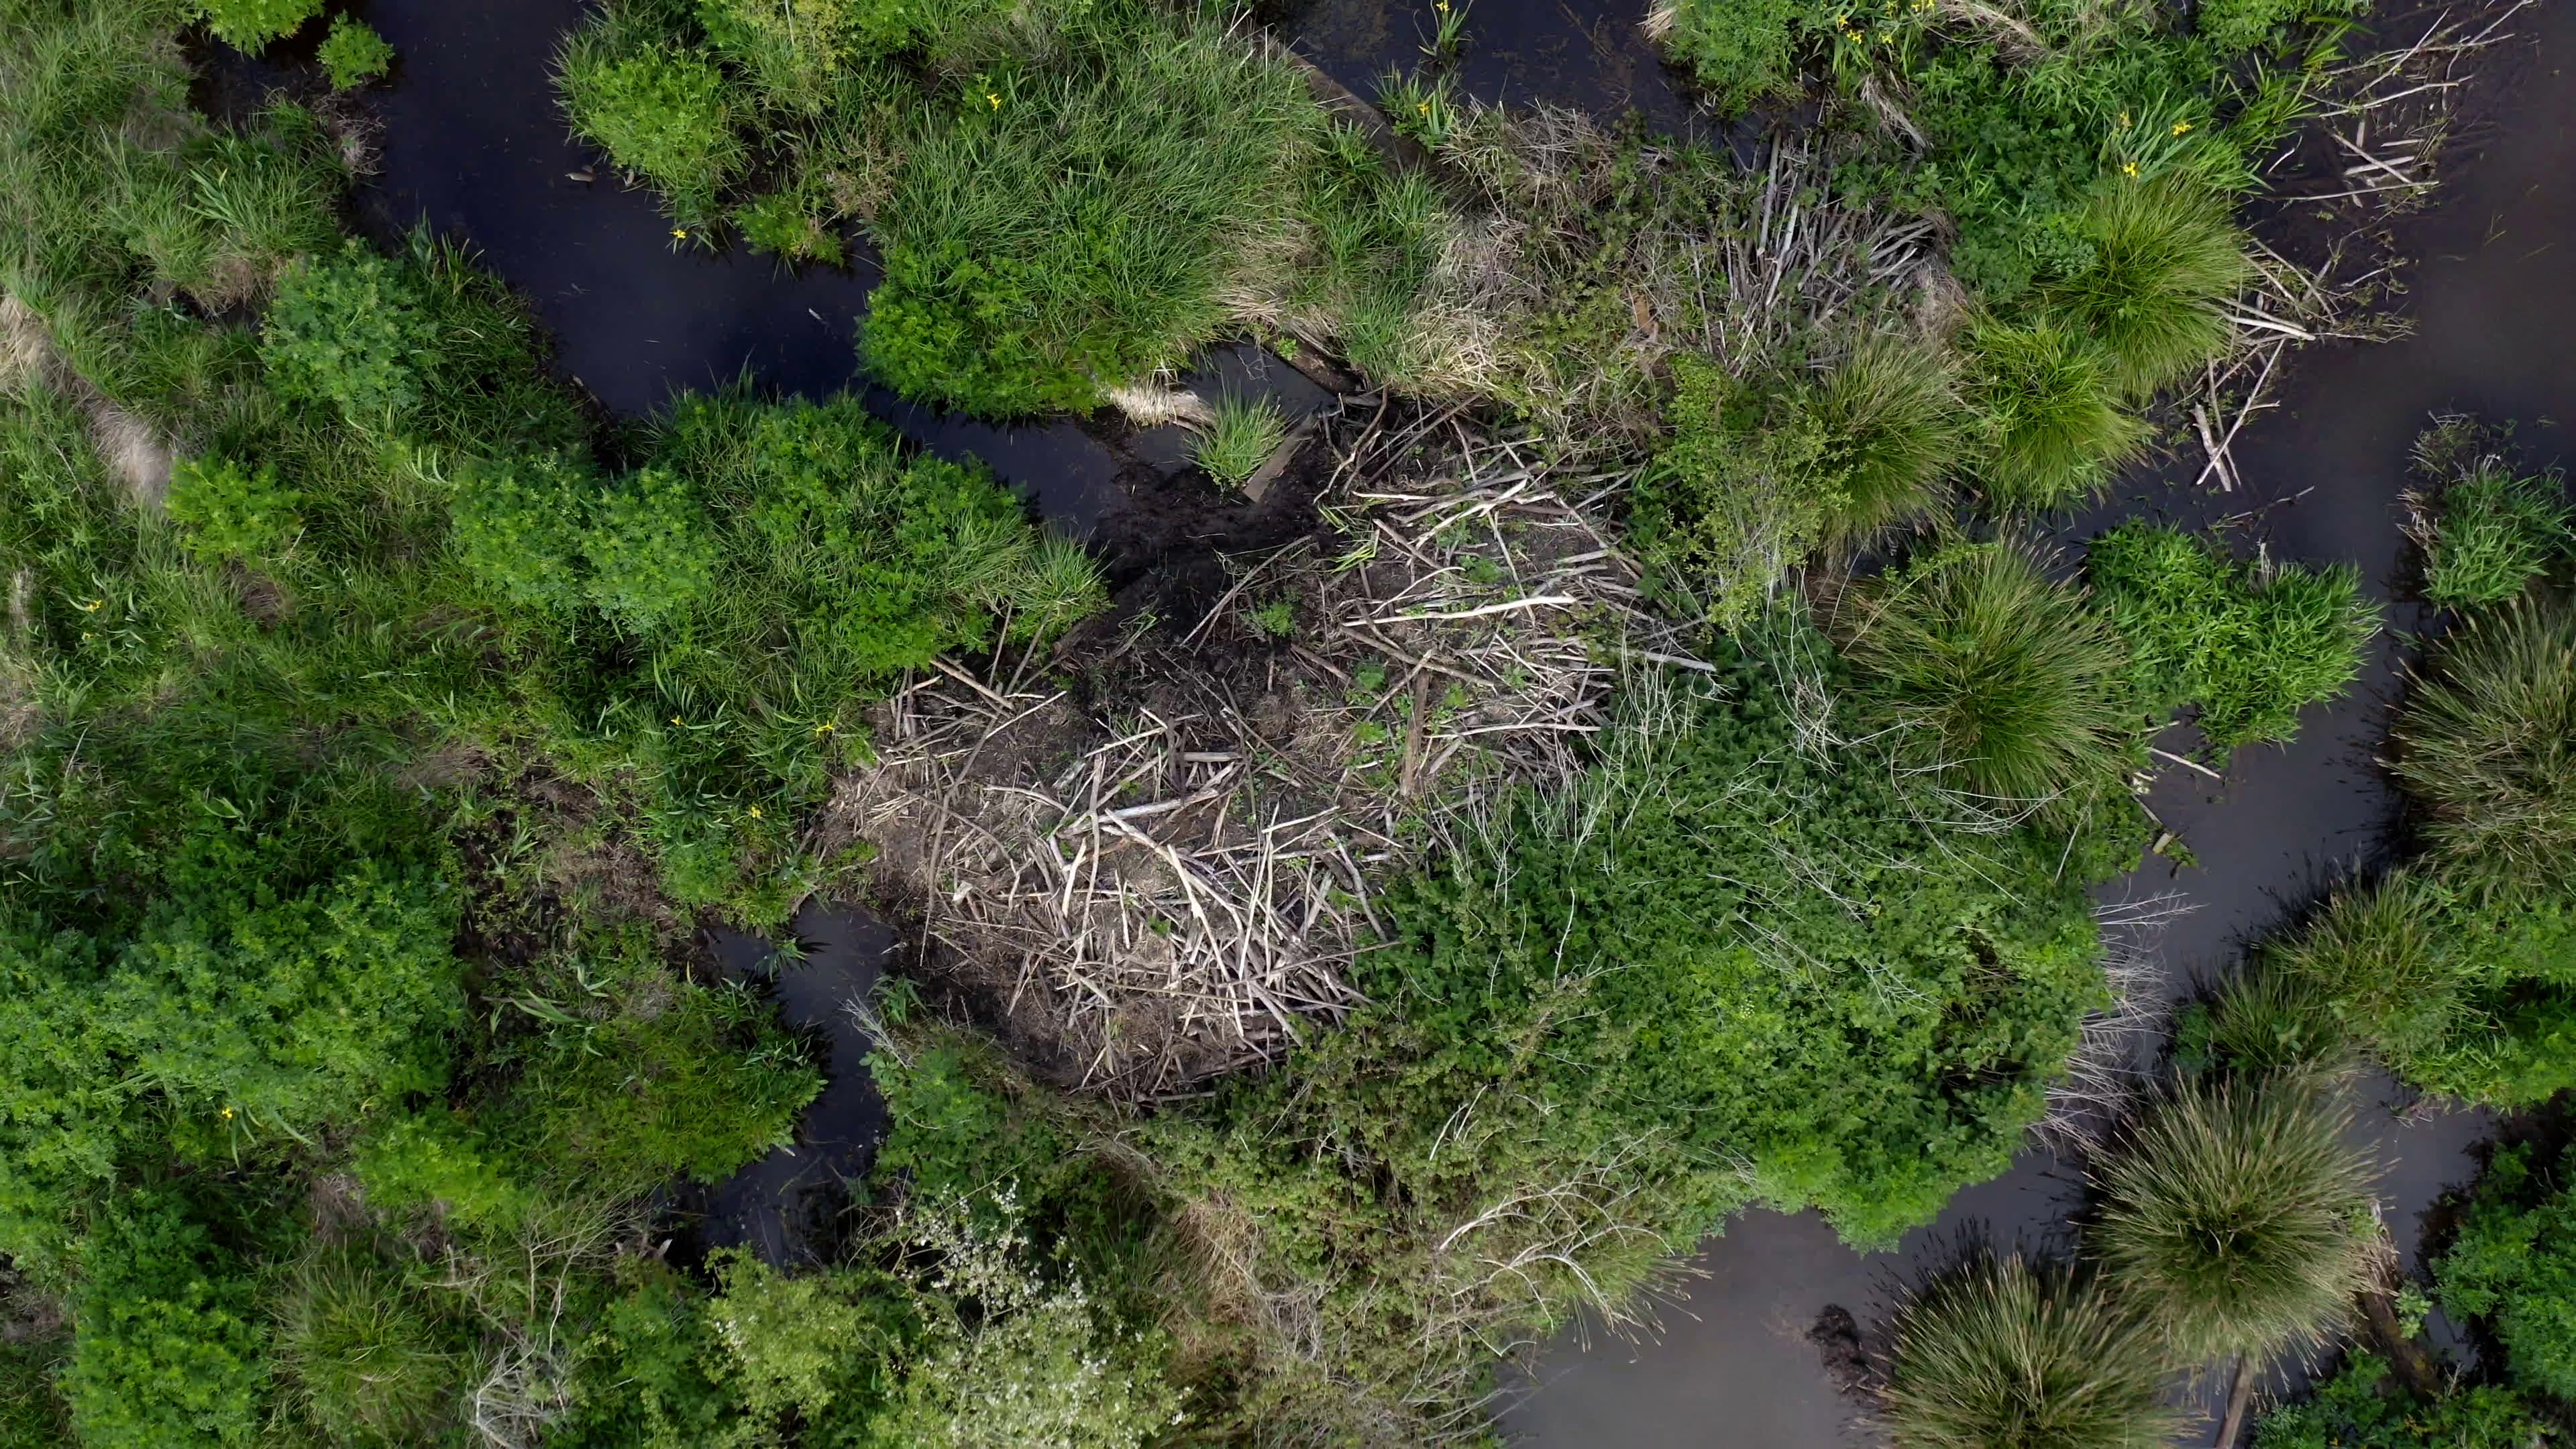 Half of U.S. Wetlands Have Disappeared. Now Conservationists are Fighting to Get Them Back.